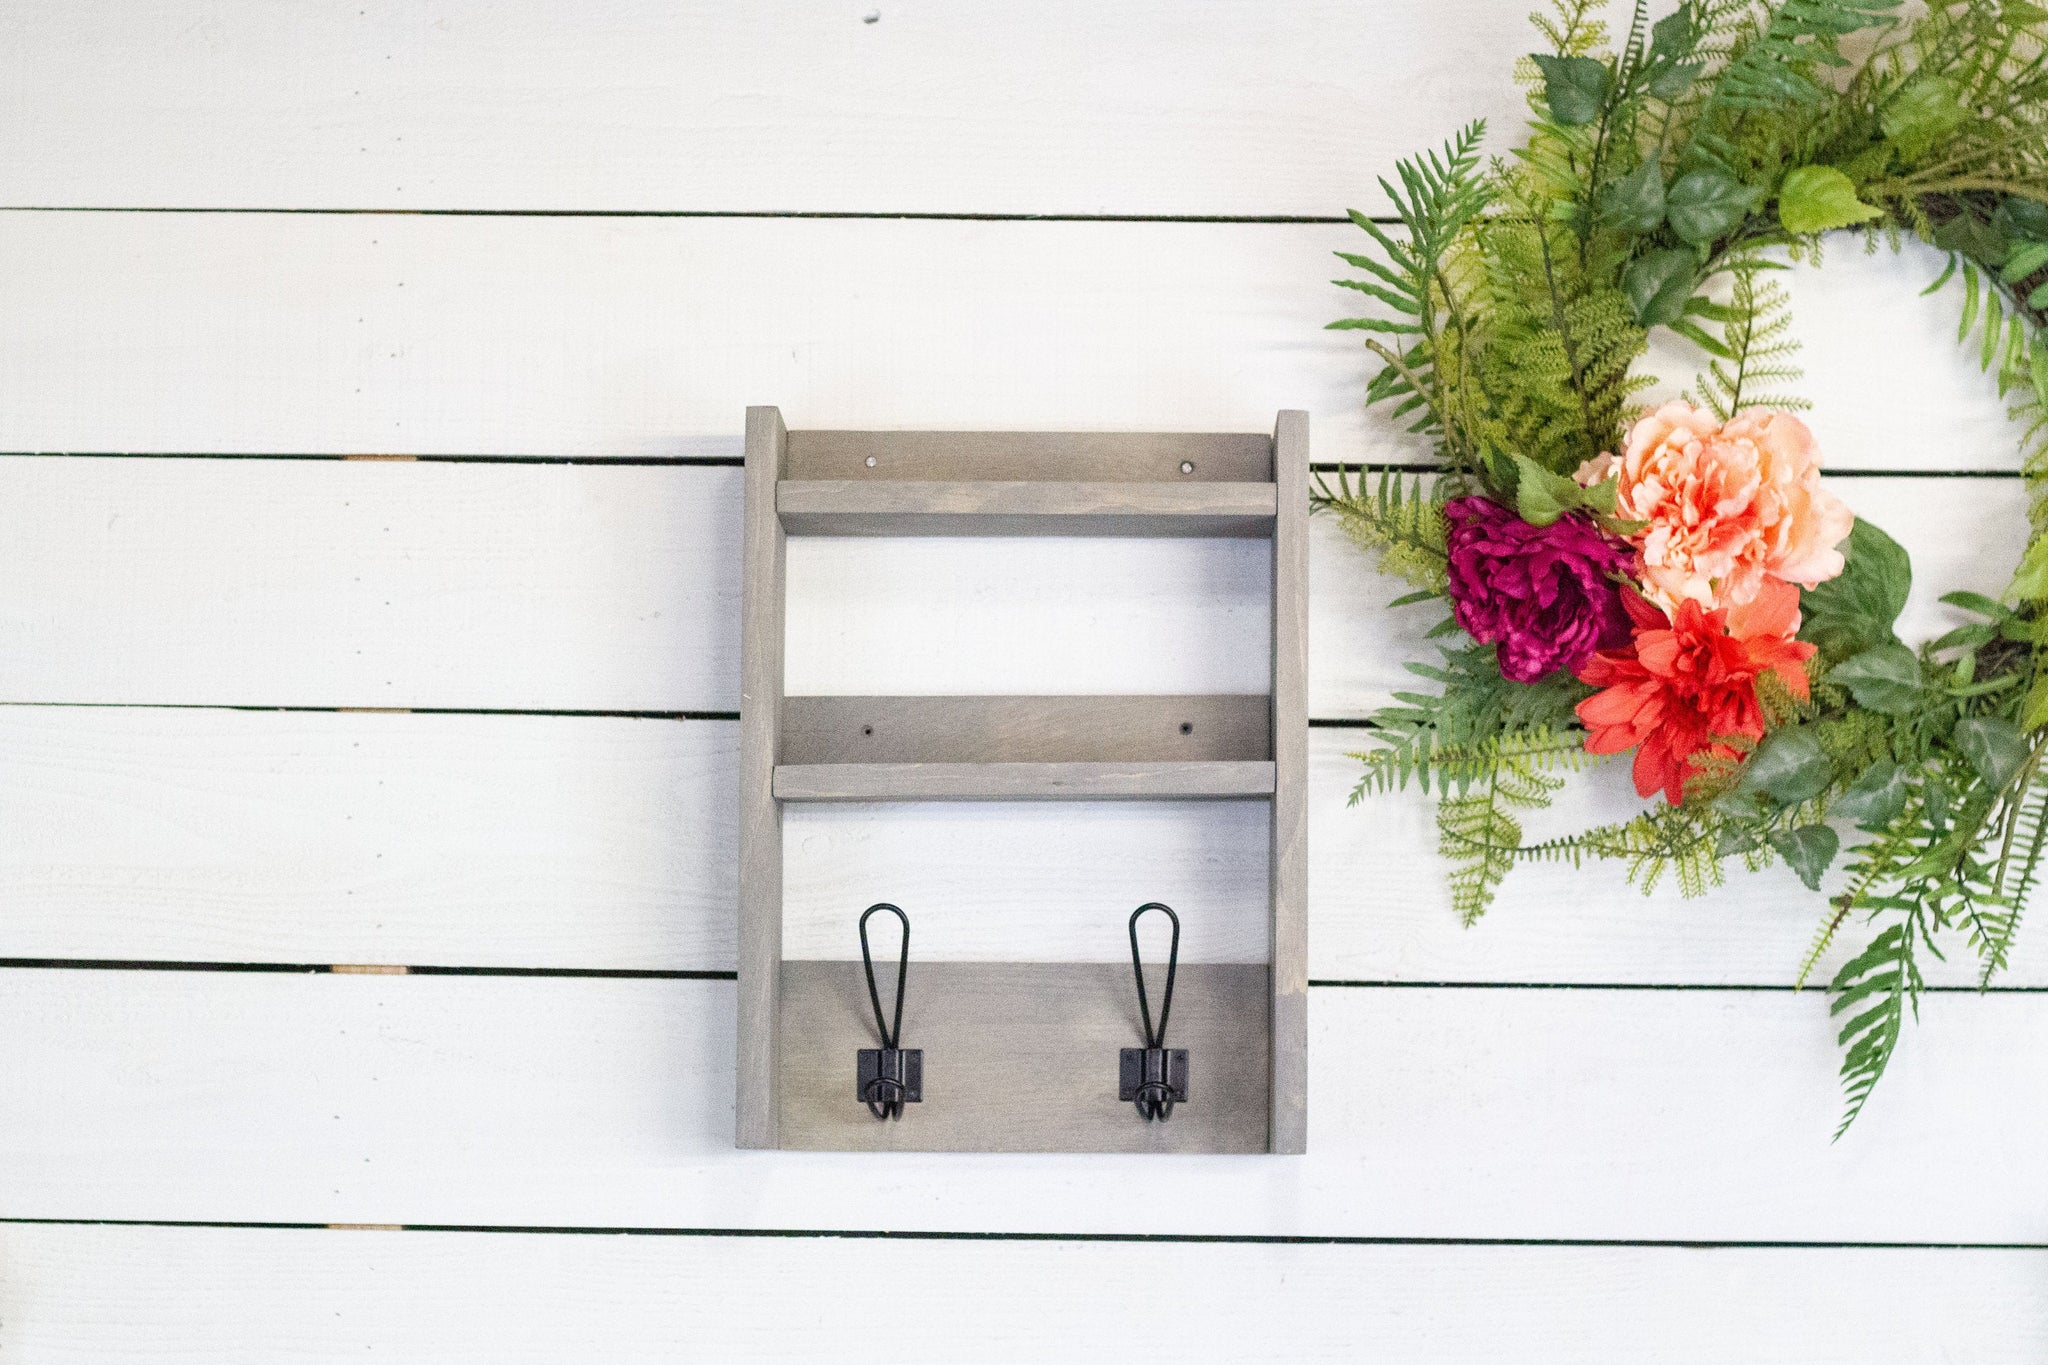 Wall Mounted Entryway Shelf with Coat Hooks - The McGarvey Workshop